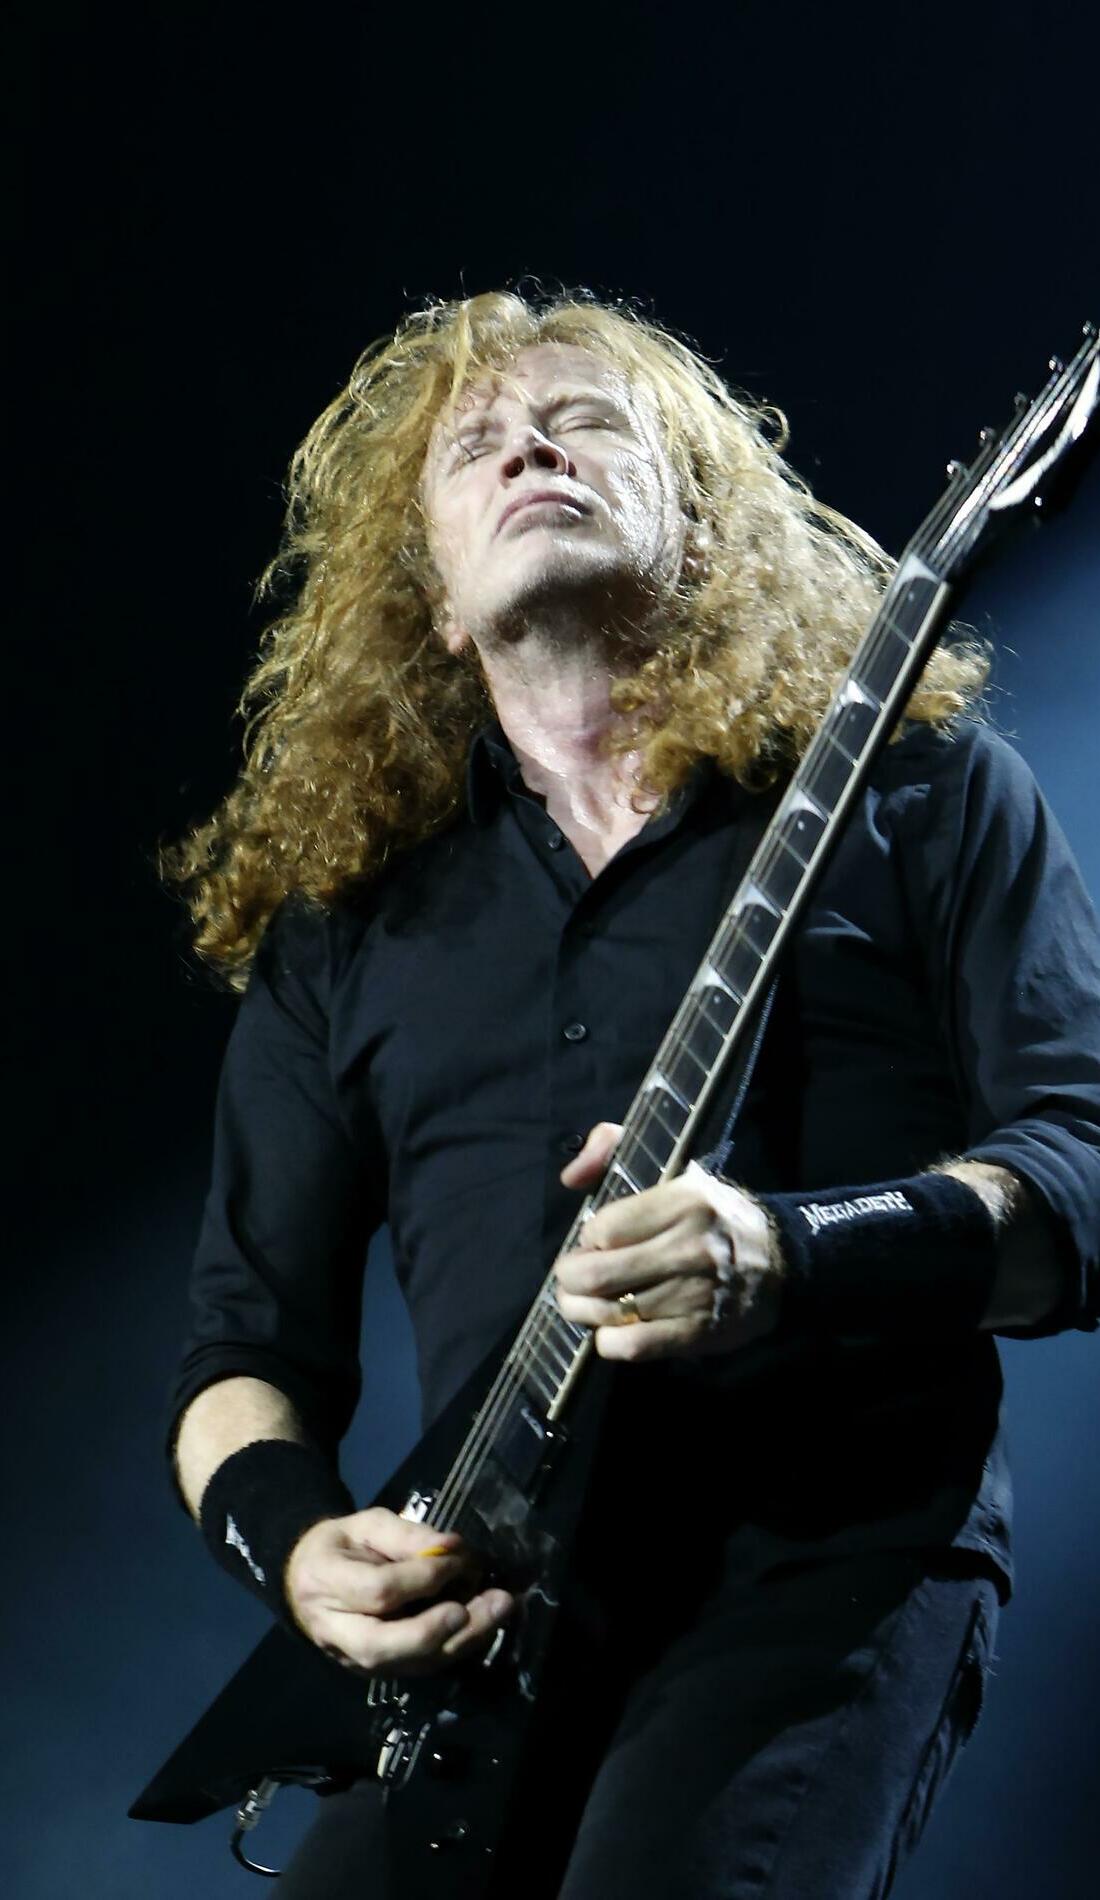 A Dave Mustaine live event